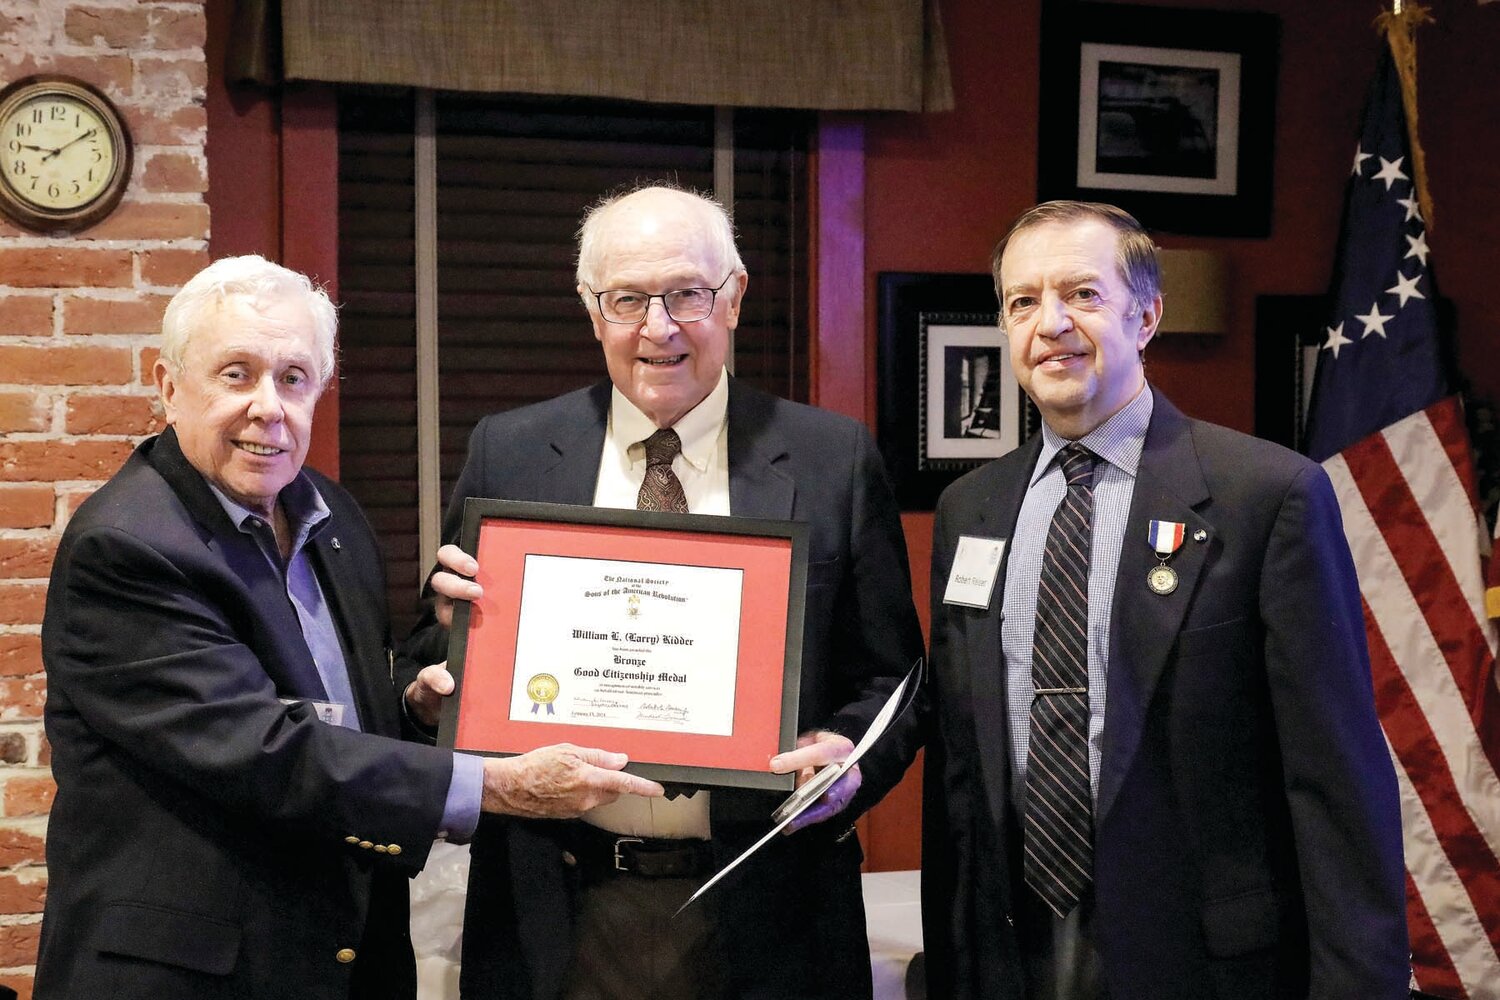 Chapter President Bob Reiser and Vice President Steve Ware present Larry Kidder with the Bronze Good Citizenship Medal and Certificate.